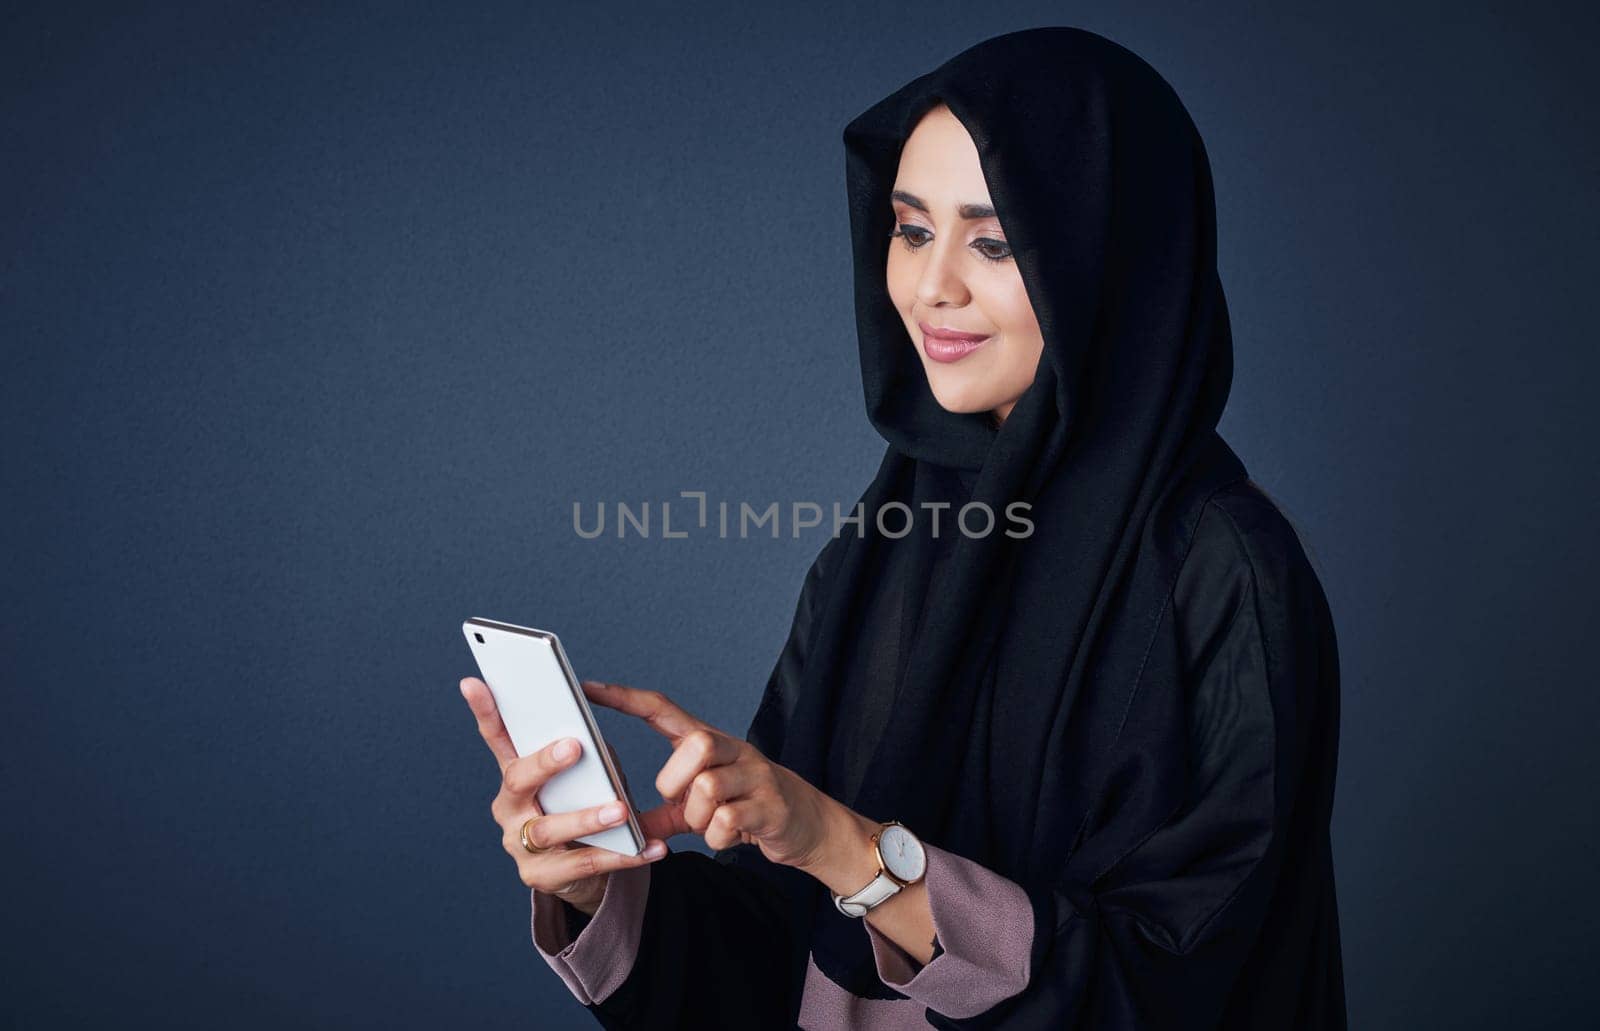 The smartest way of communication for her. Studio shot of a young woman wearing a burqa and using a mobile phone against a gray background. by YuriArcurs